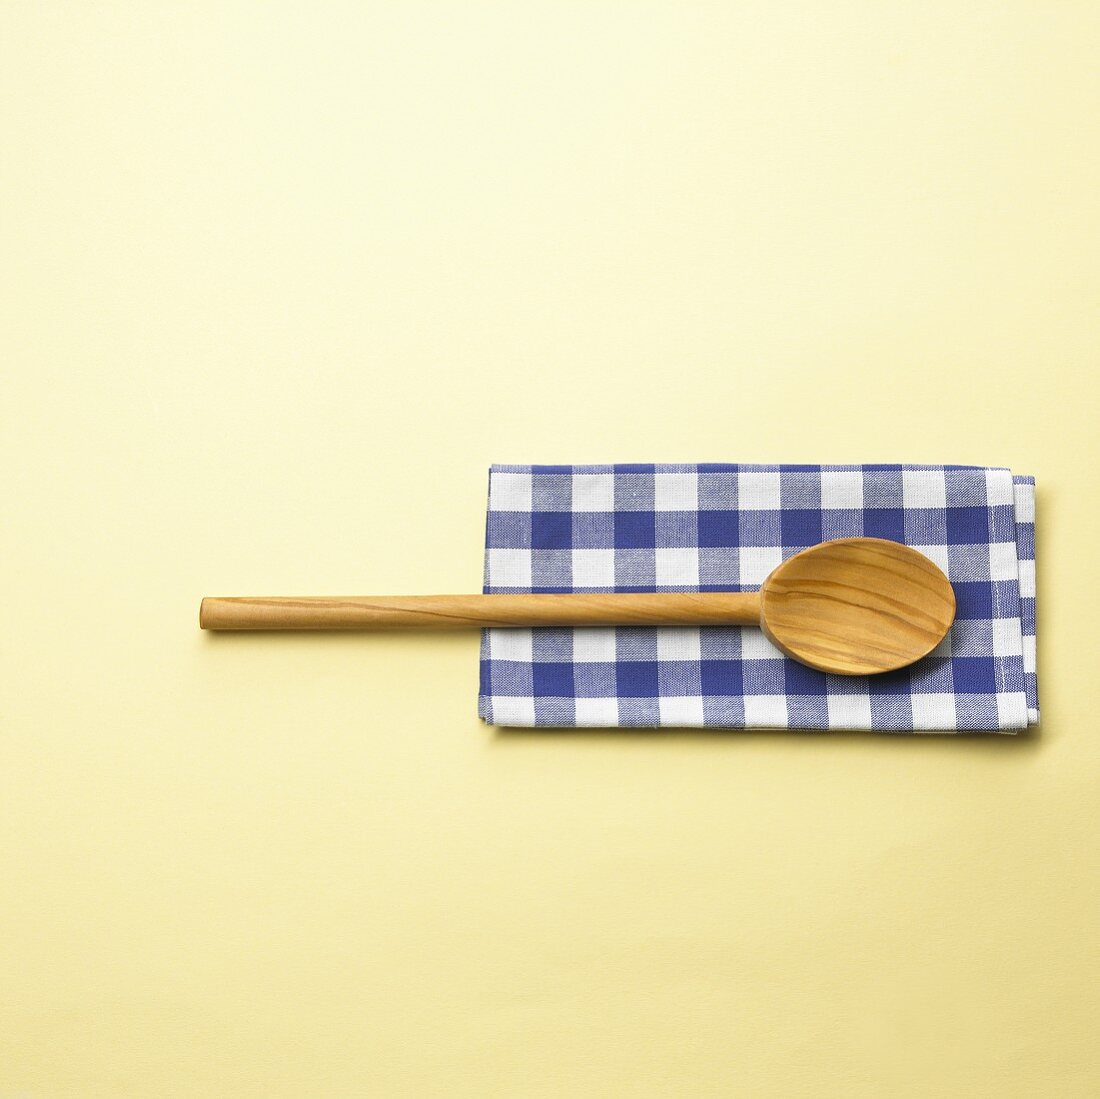 Wooden spoon on checked cloth